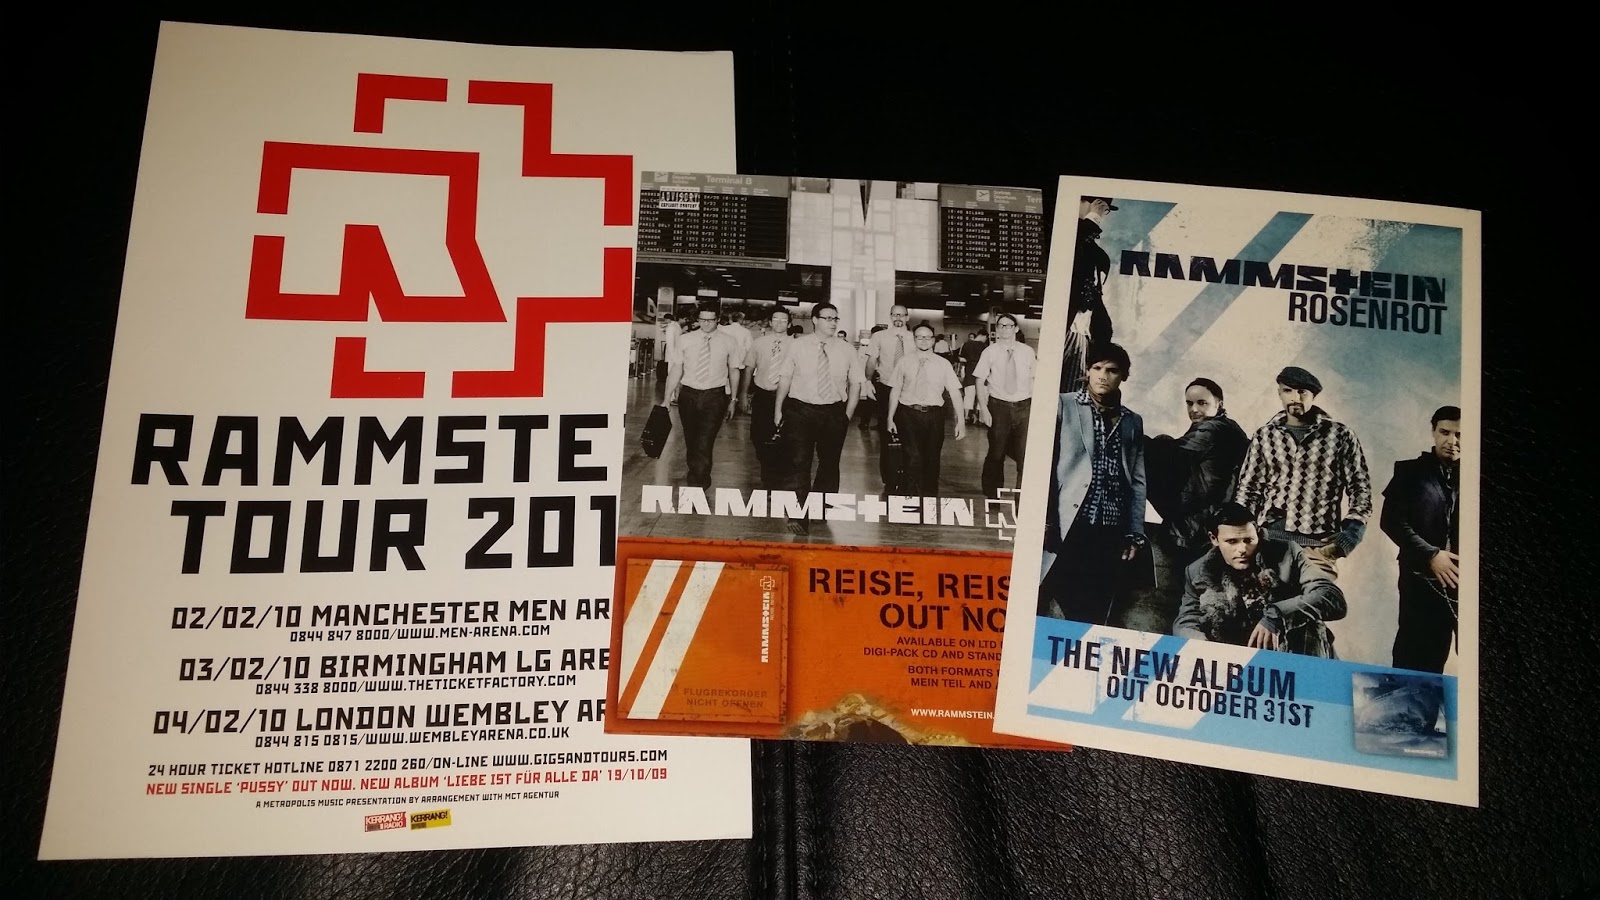 RAMMSTEIN | Welcome to the Rammstein collection by RC: Rammstein -  Rosenrot/ReiseReise (Flyers)